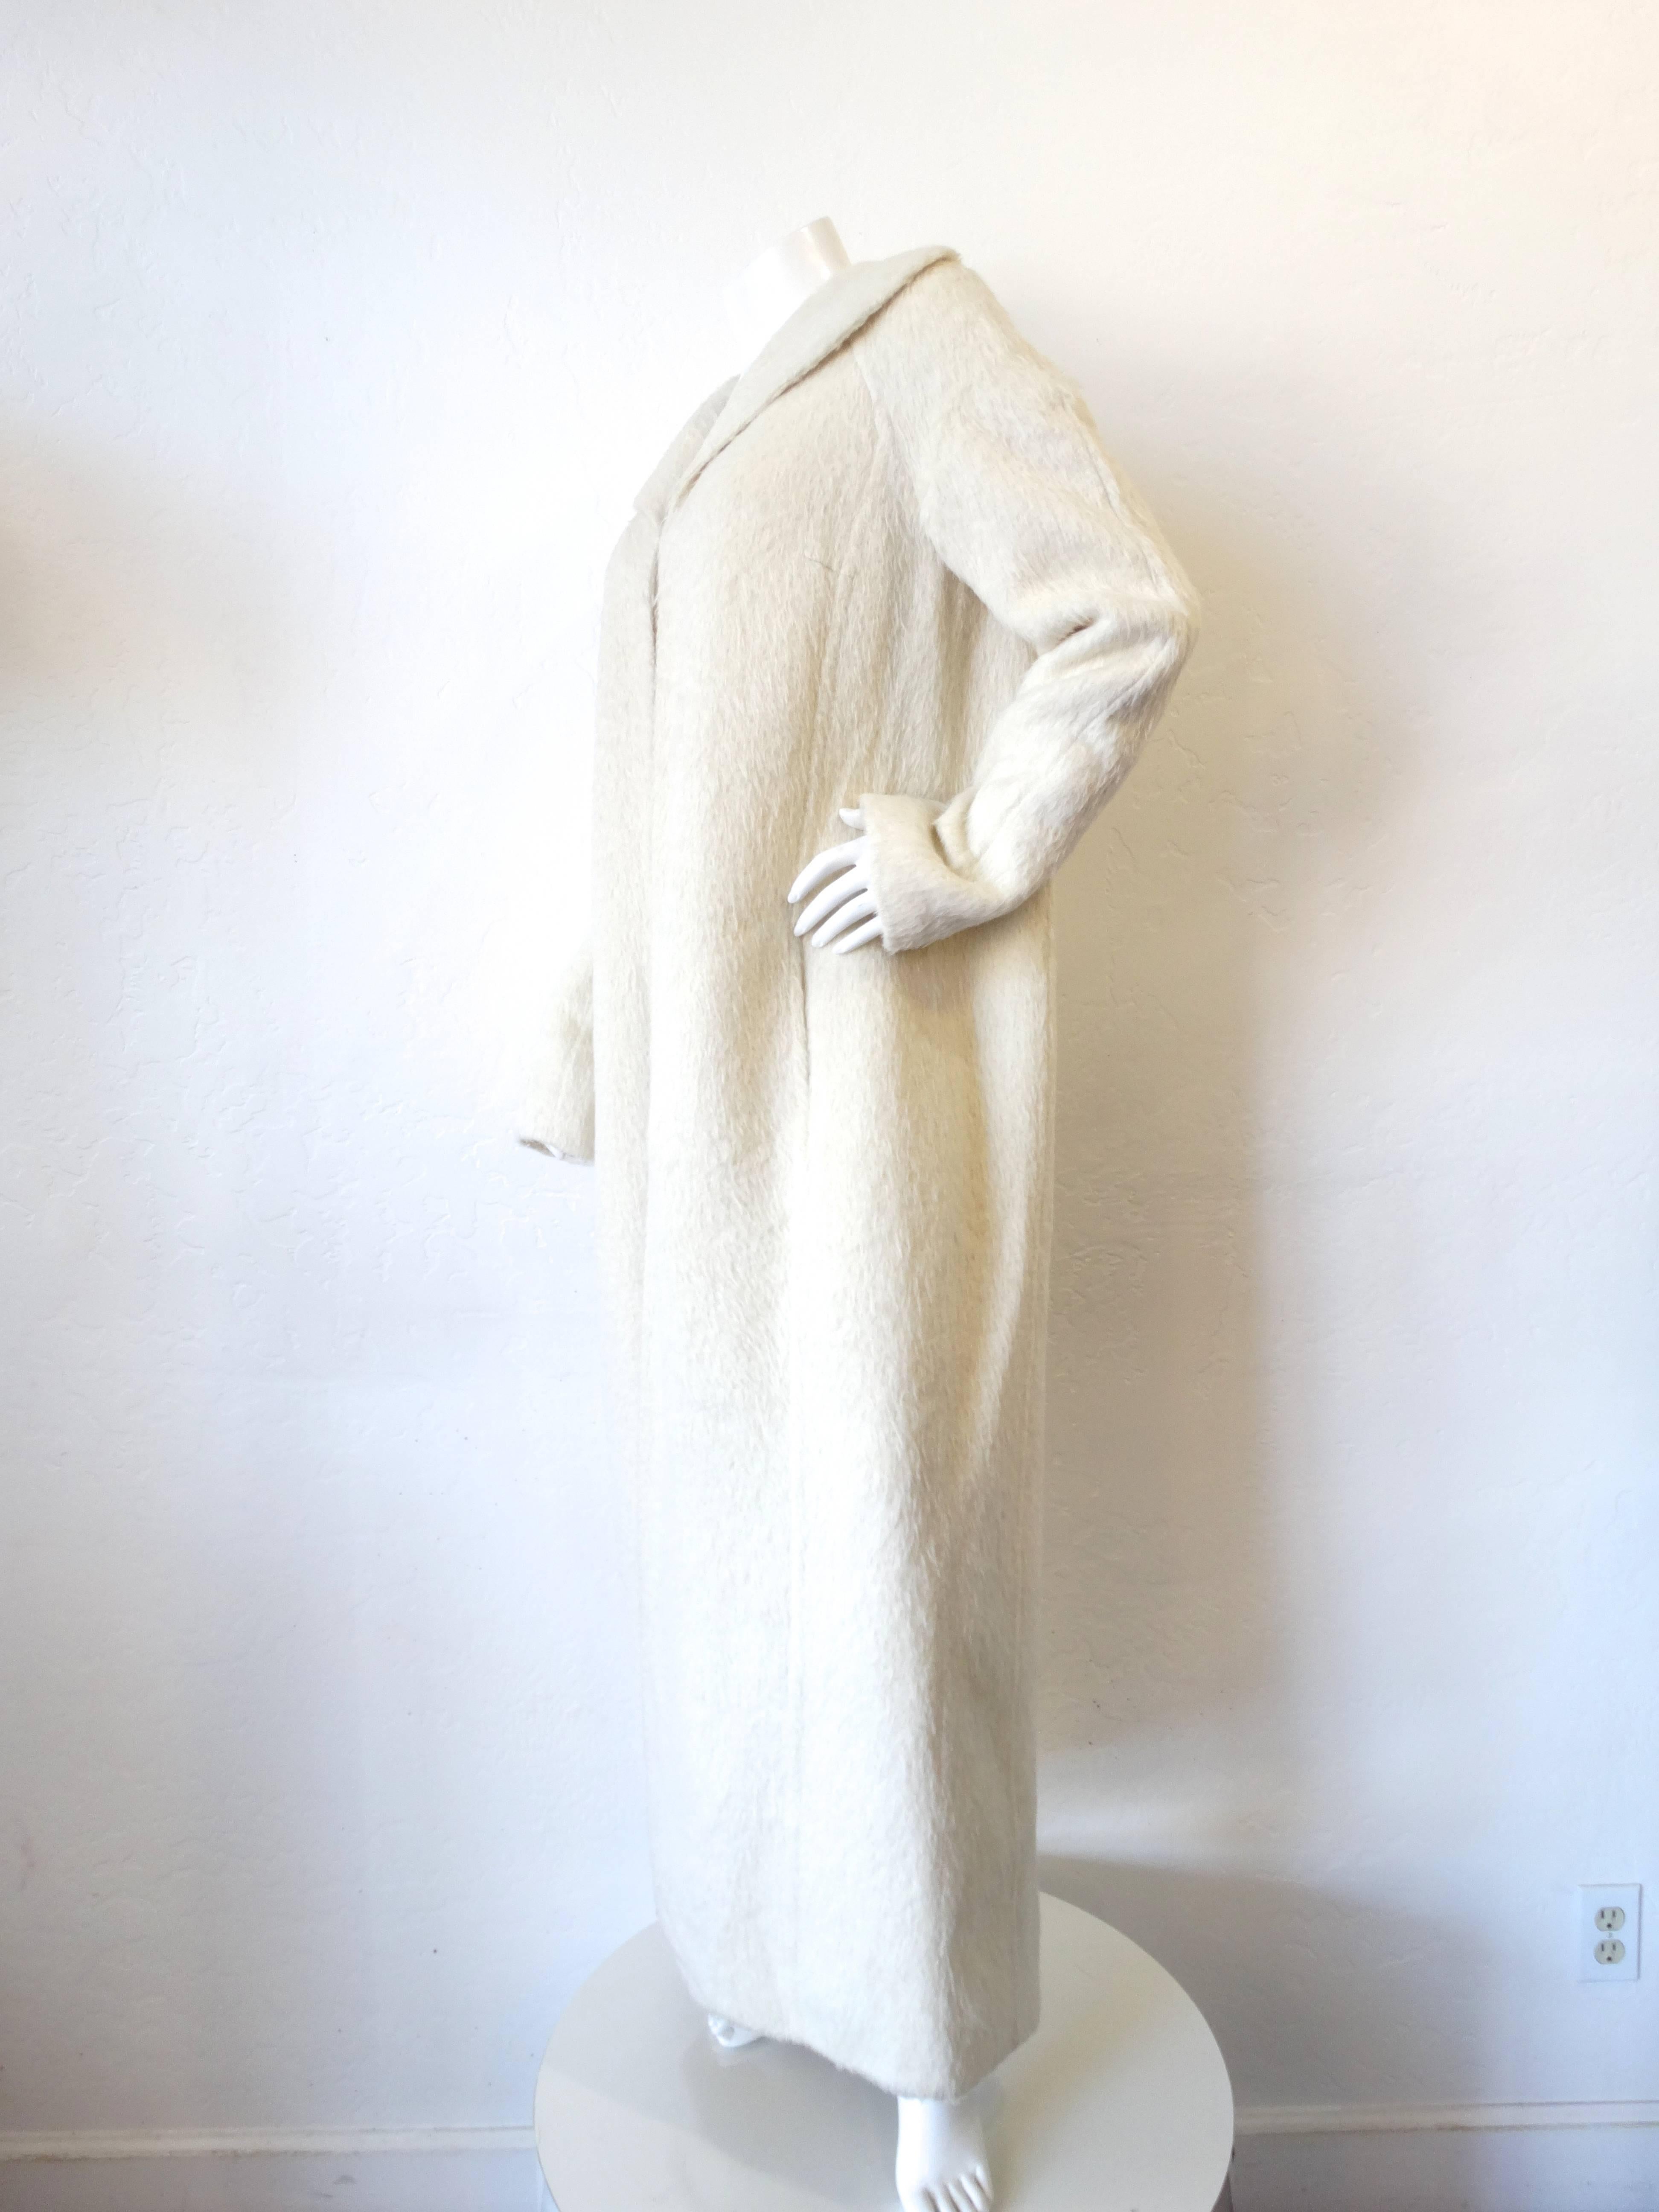 Incredible 2000s Gianfranco Ferre Runway fur coat! Long, swing coat style, has a hook and eye closure at the bust. Creamy white soft fur. Elongated arms bunch up nicely at the cuffs. All original tags intact. 

Bust: 42” 
Sleeve: 26”
Length: 56”